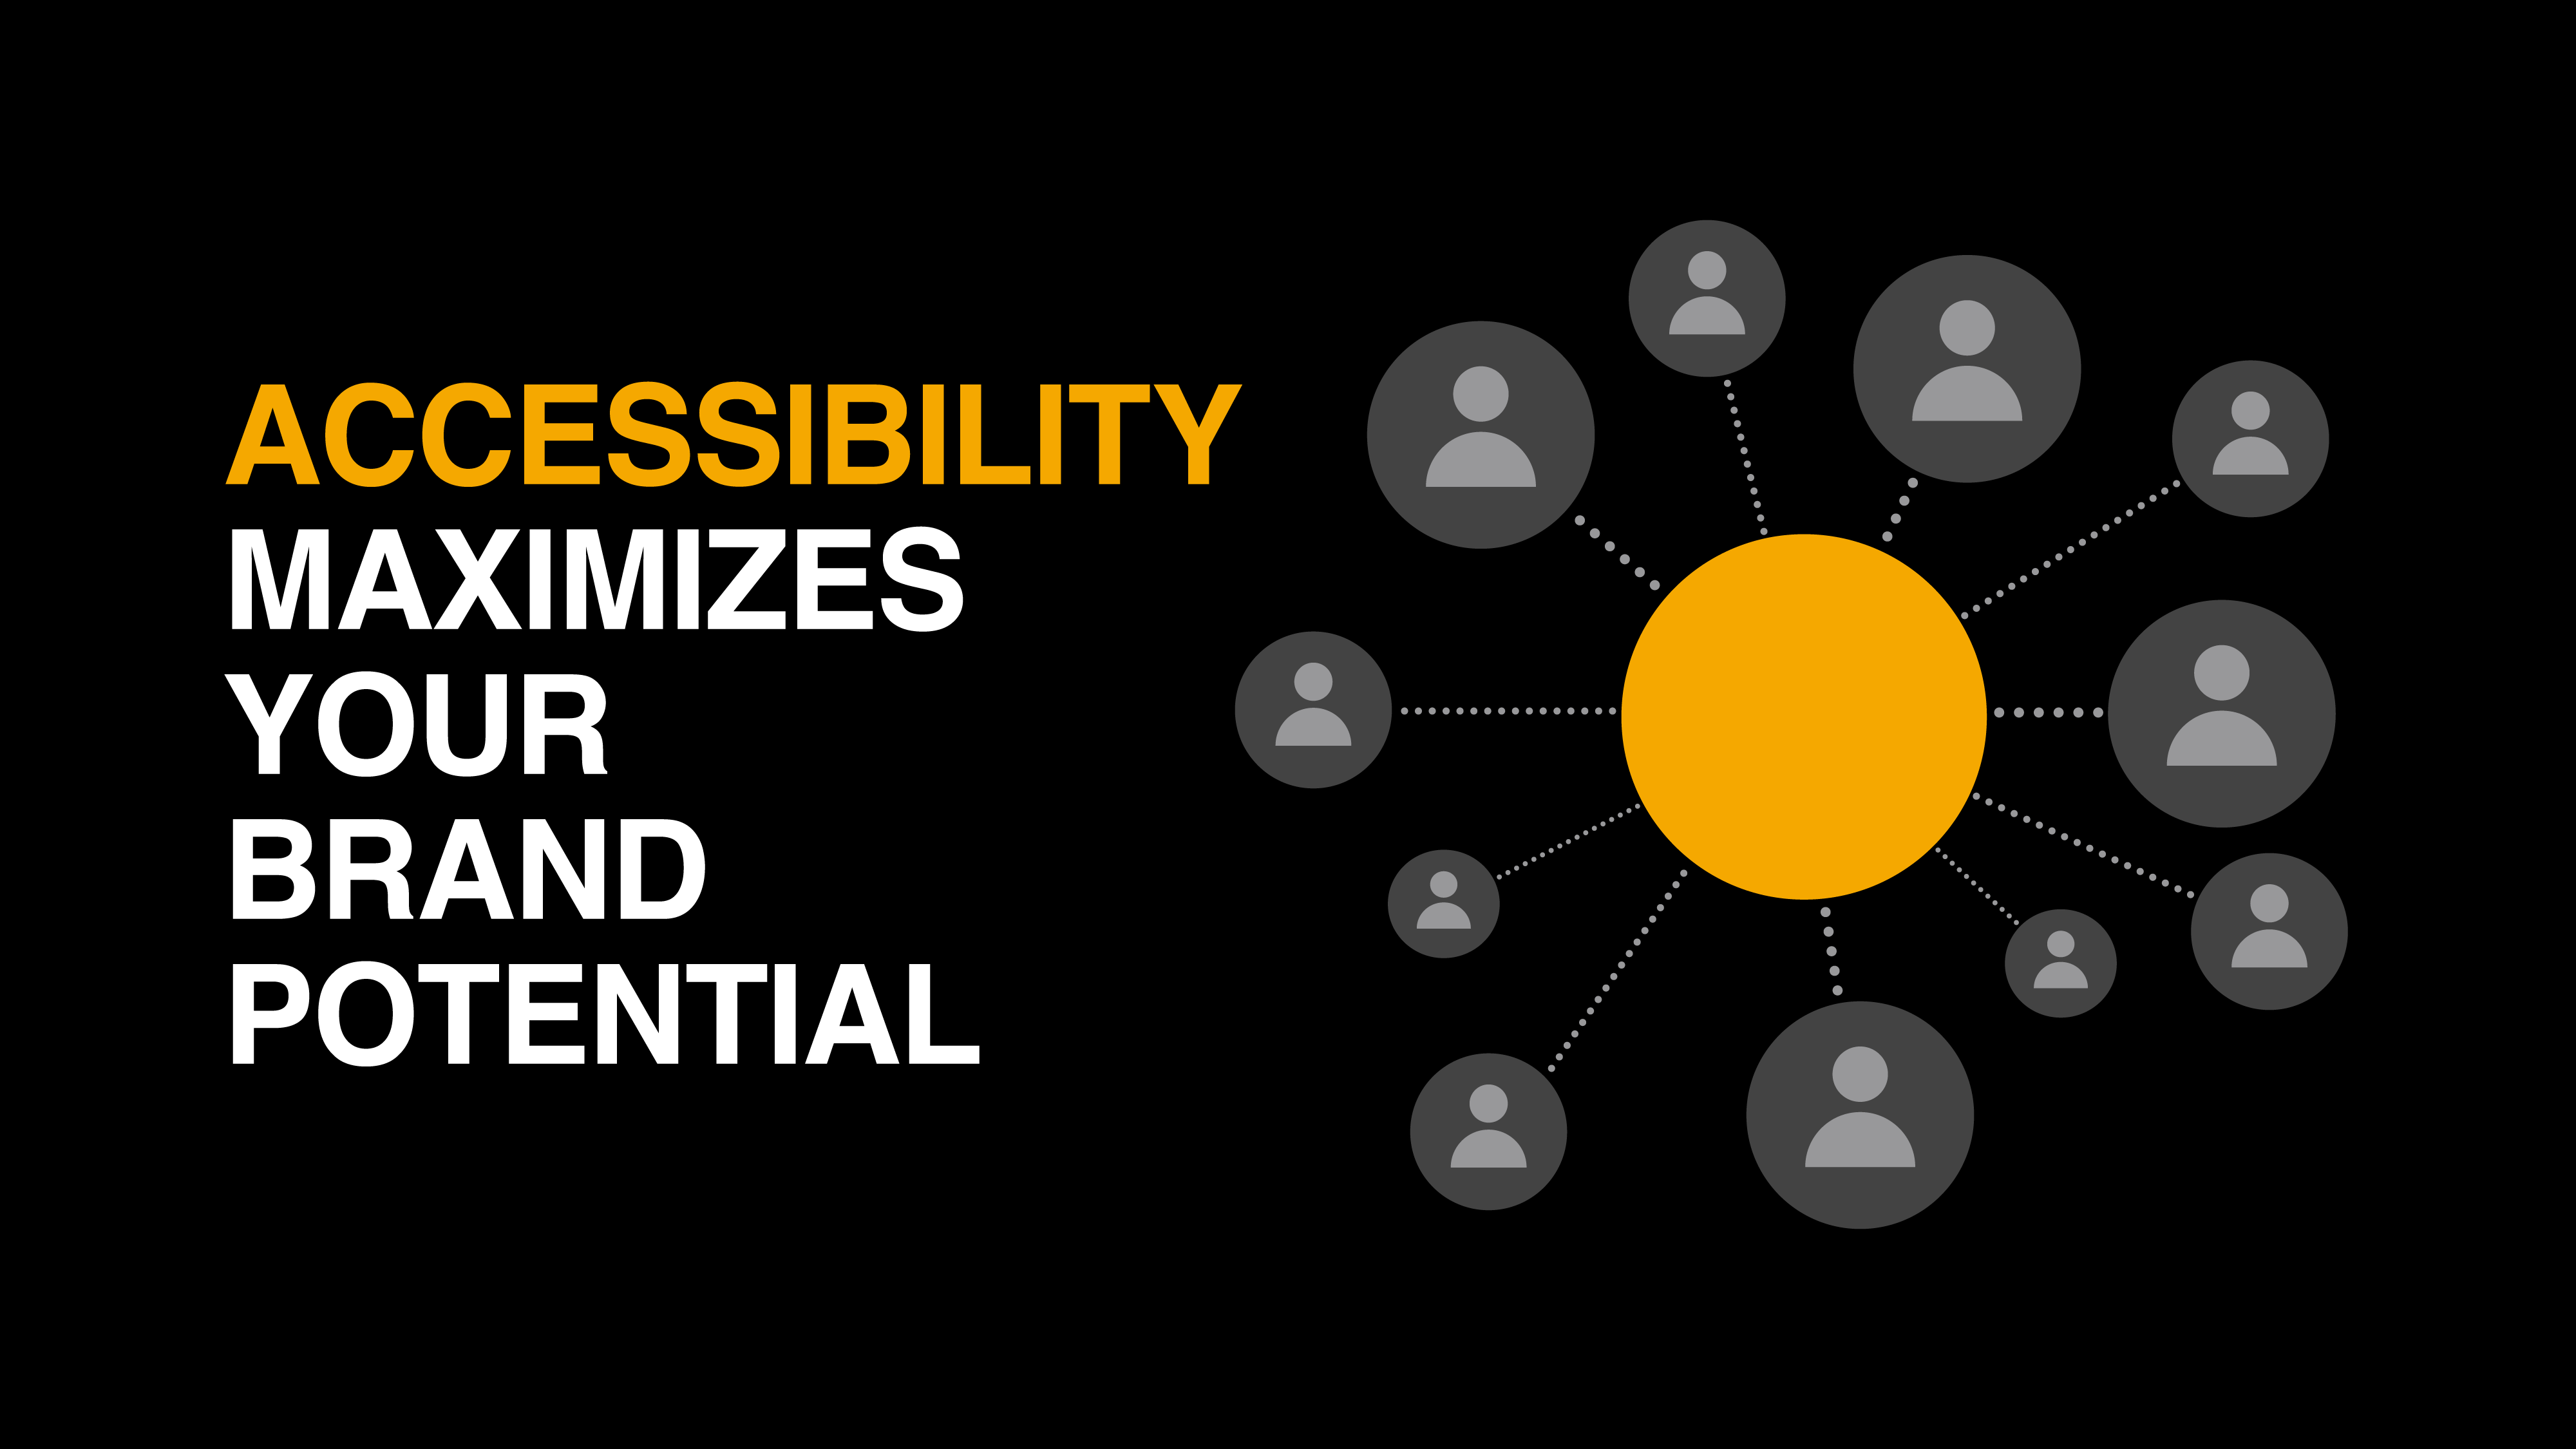 Accessibility maximizes your brand potential.